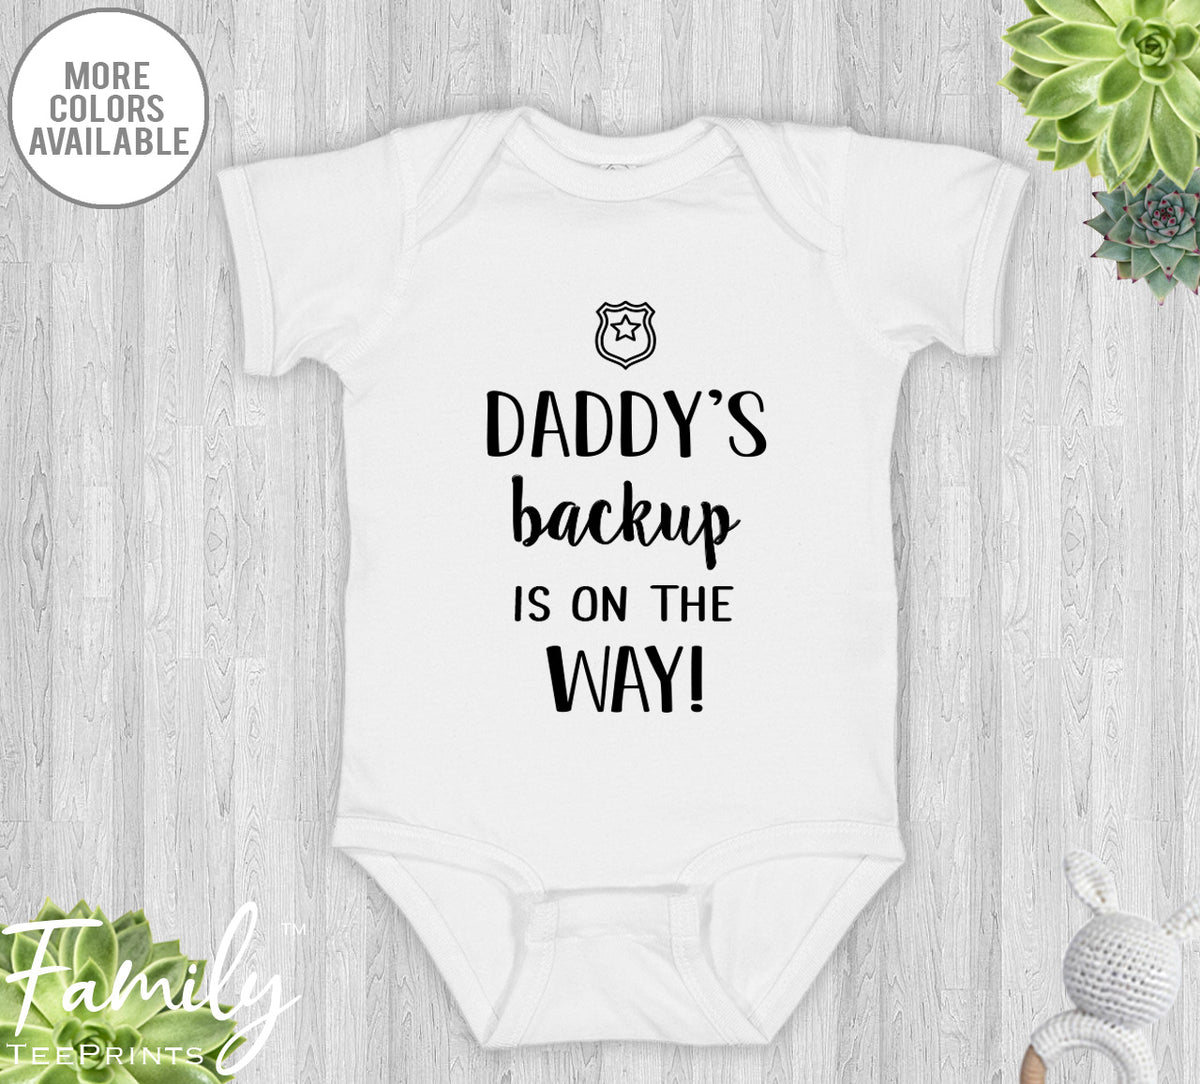 Daddy's Backup Is On The Way - Baby Onesie - Pregnancy Reveal Gift - Baby Announcement